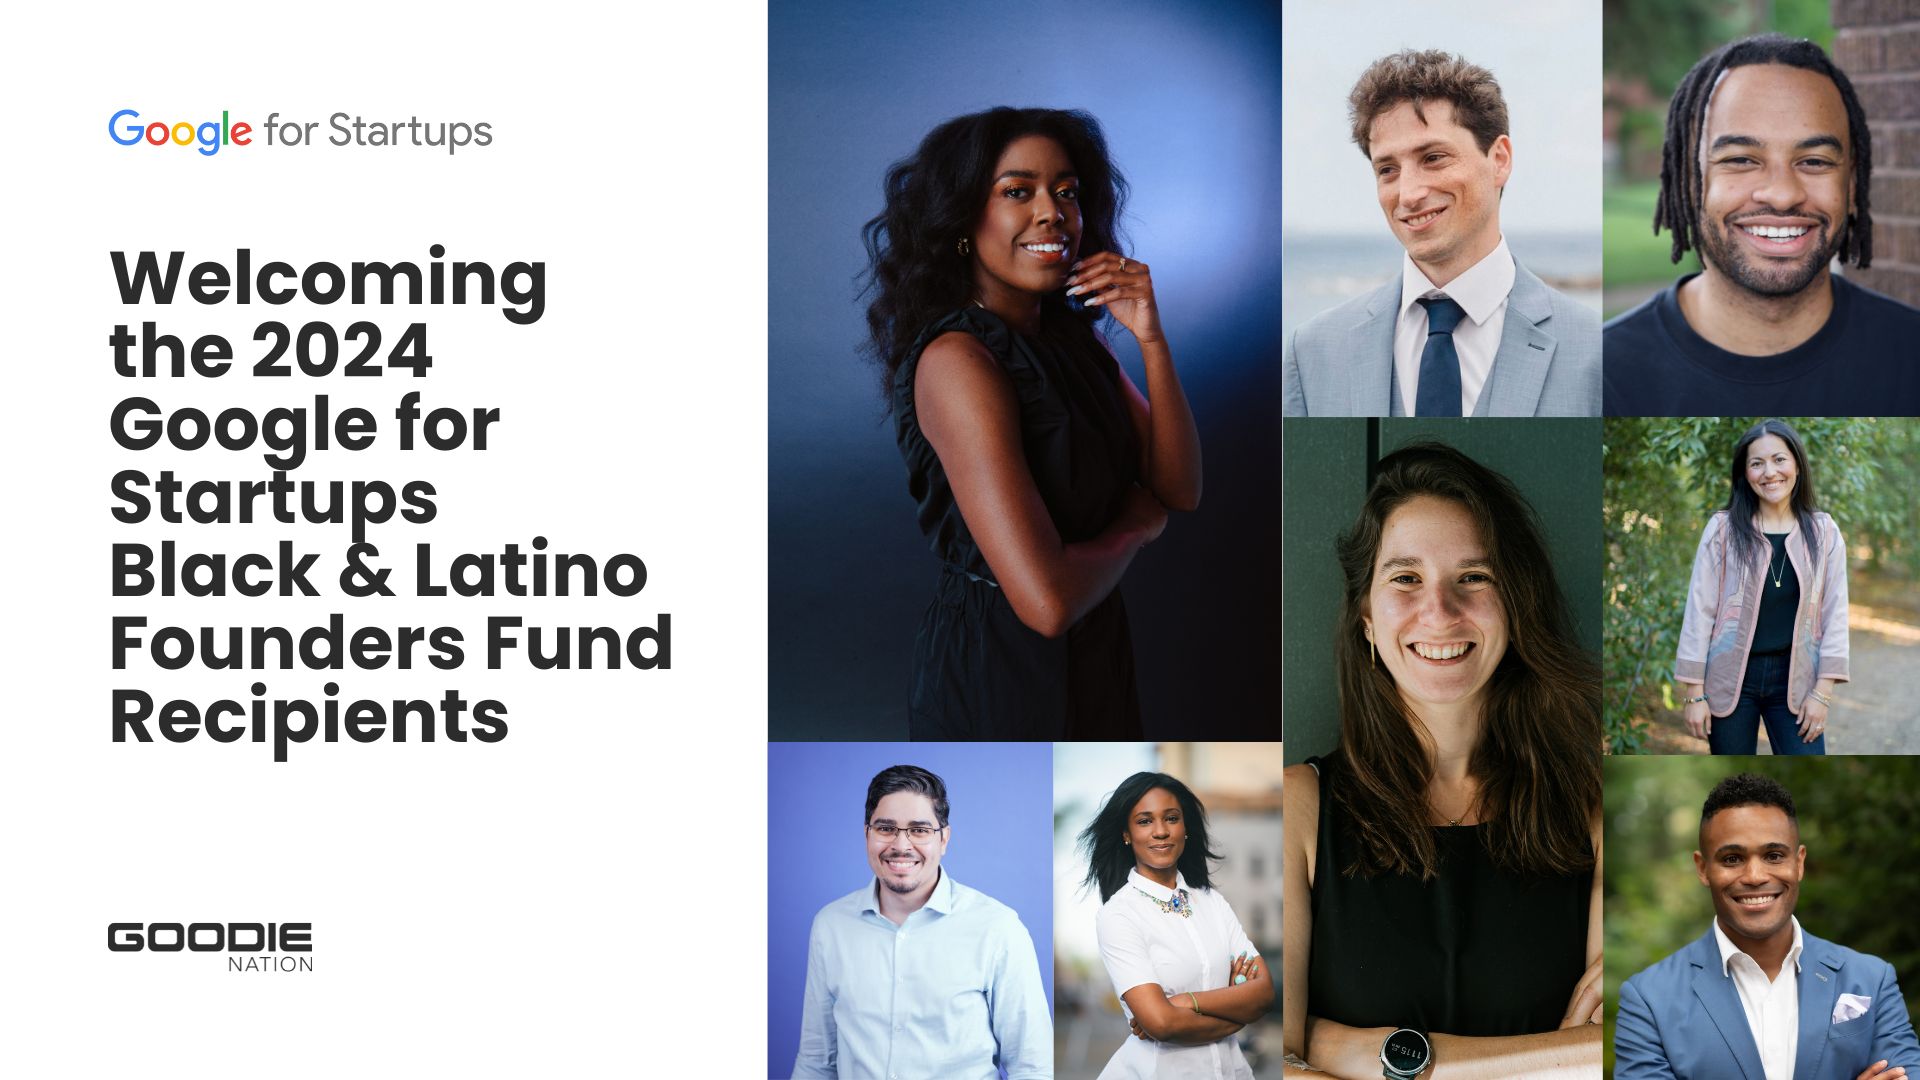 Goodie Nation Welcomes the 2024 Google for Startups Black and Latino Founders Fund Recipients